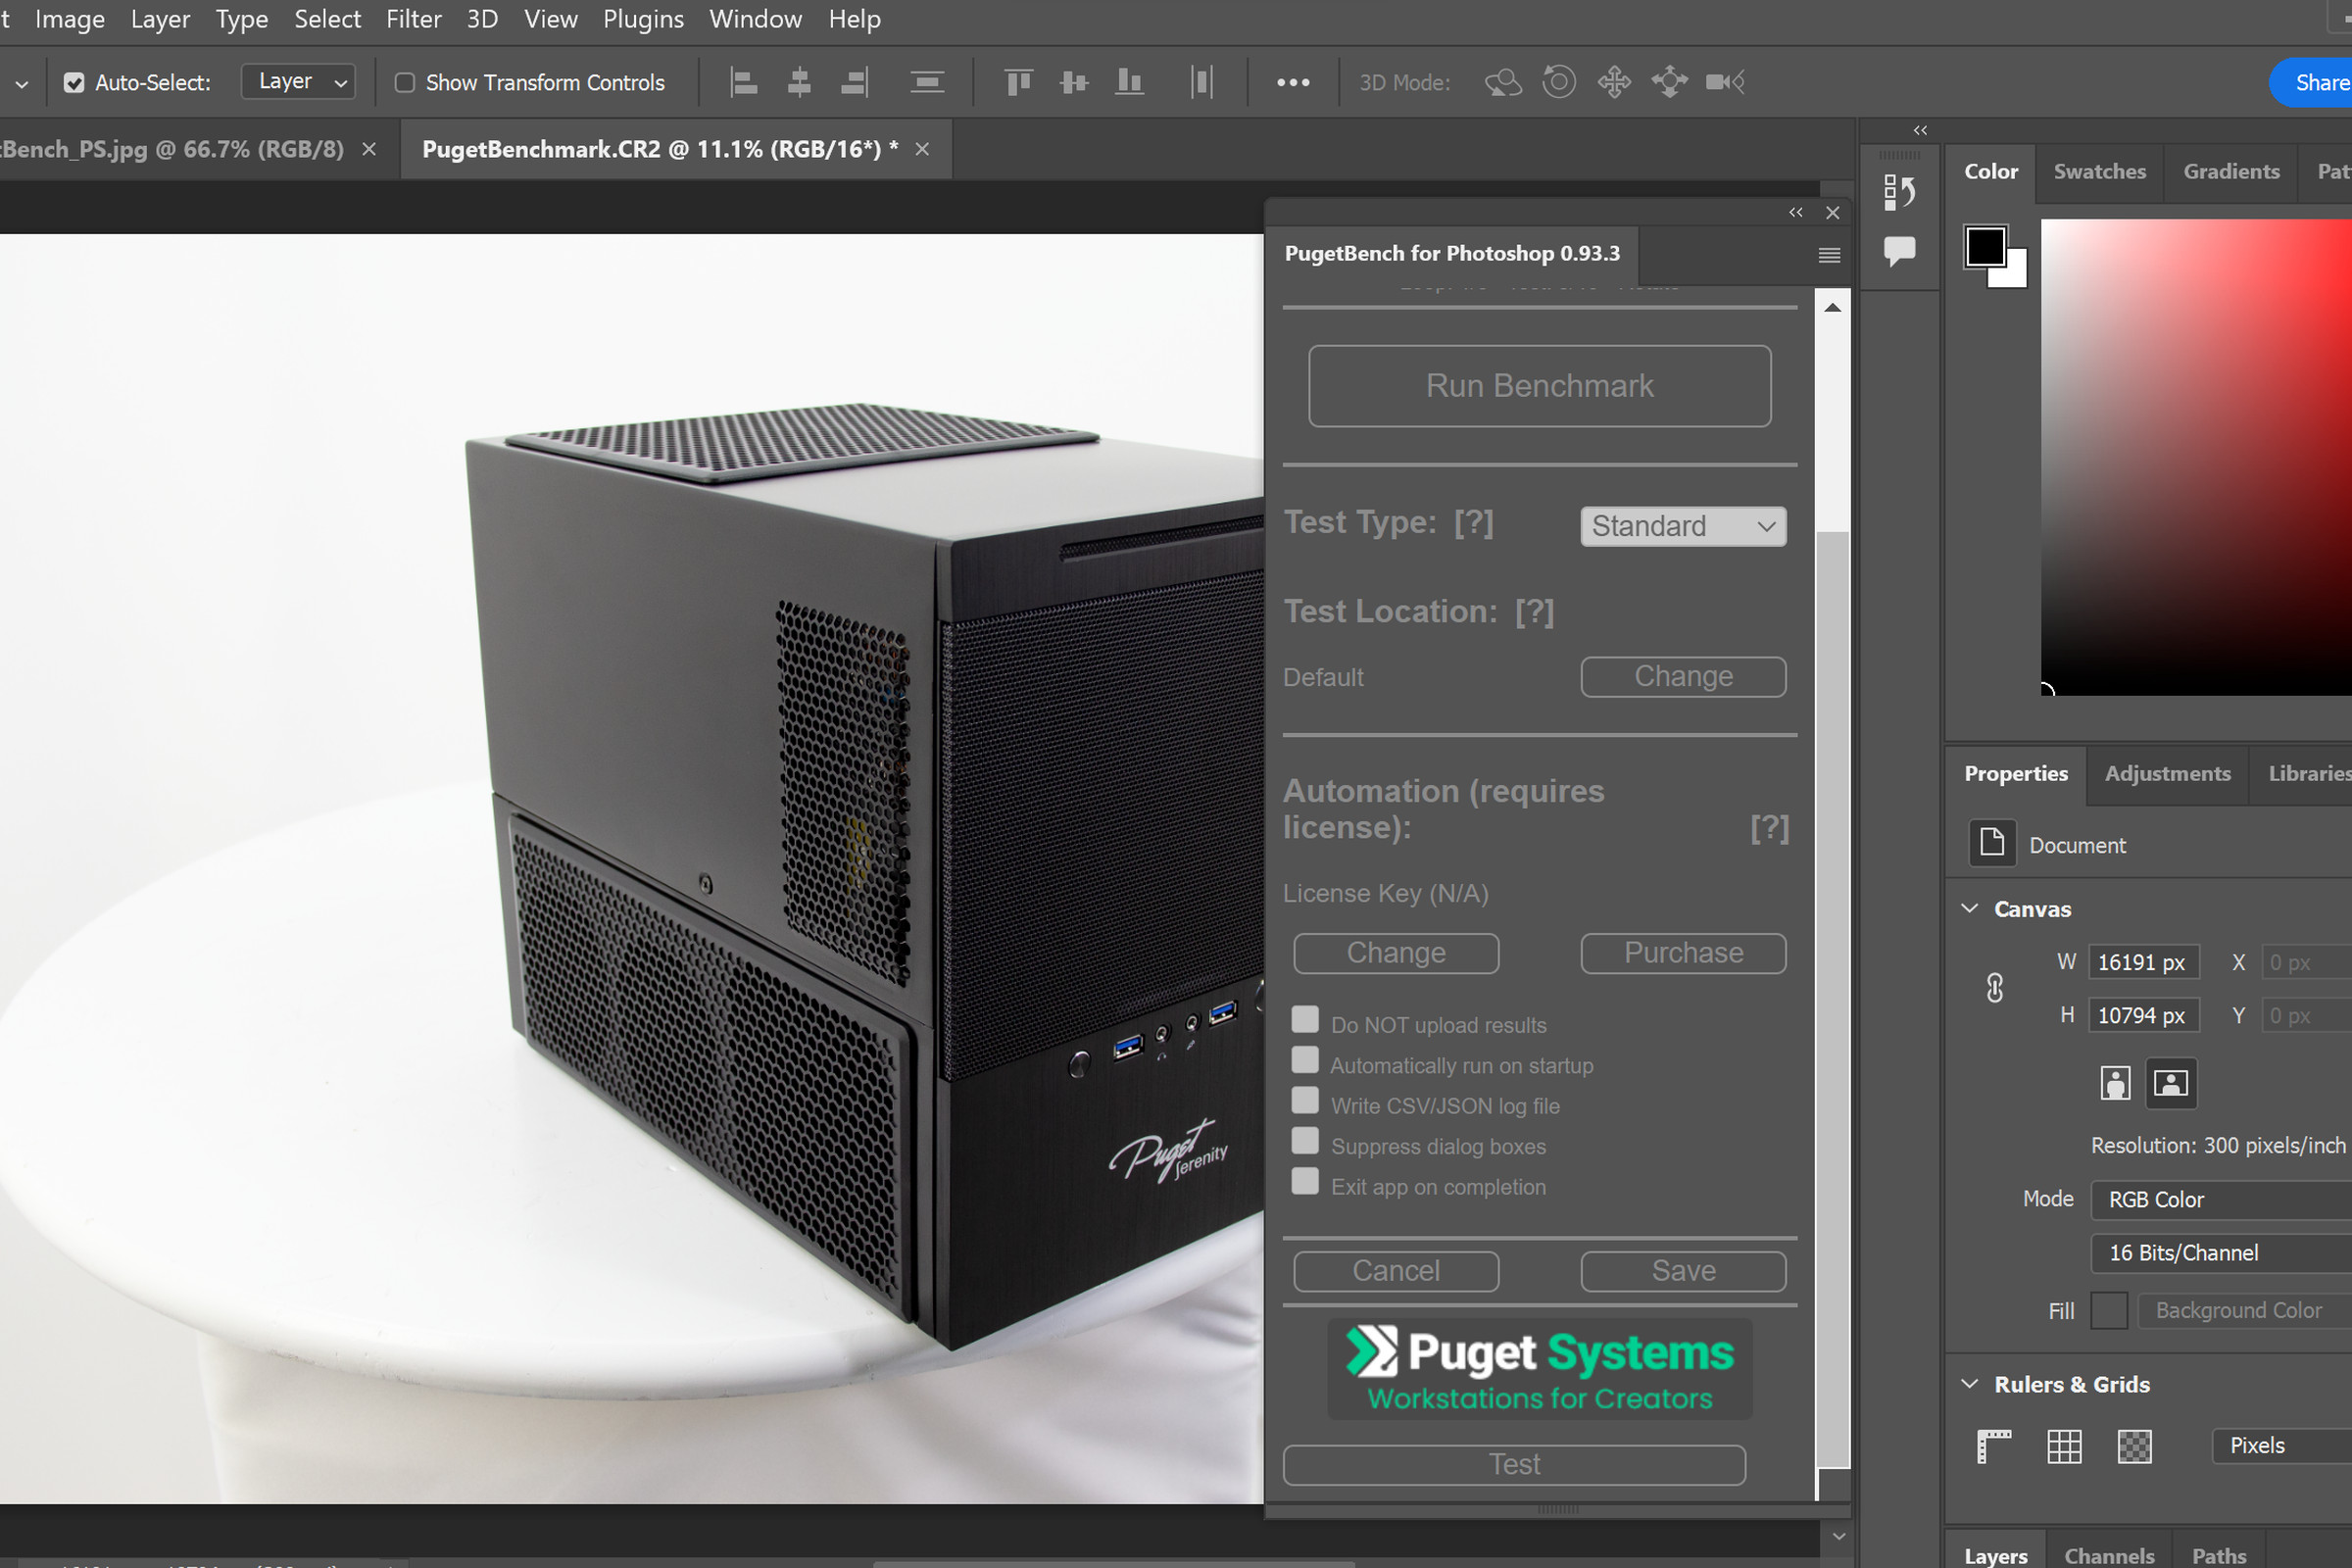 A screenshot of PugetBench for Photoshop running in Photoshop.